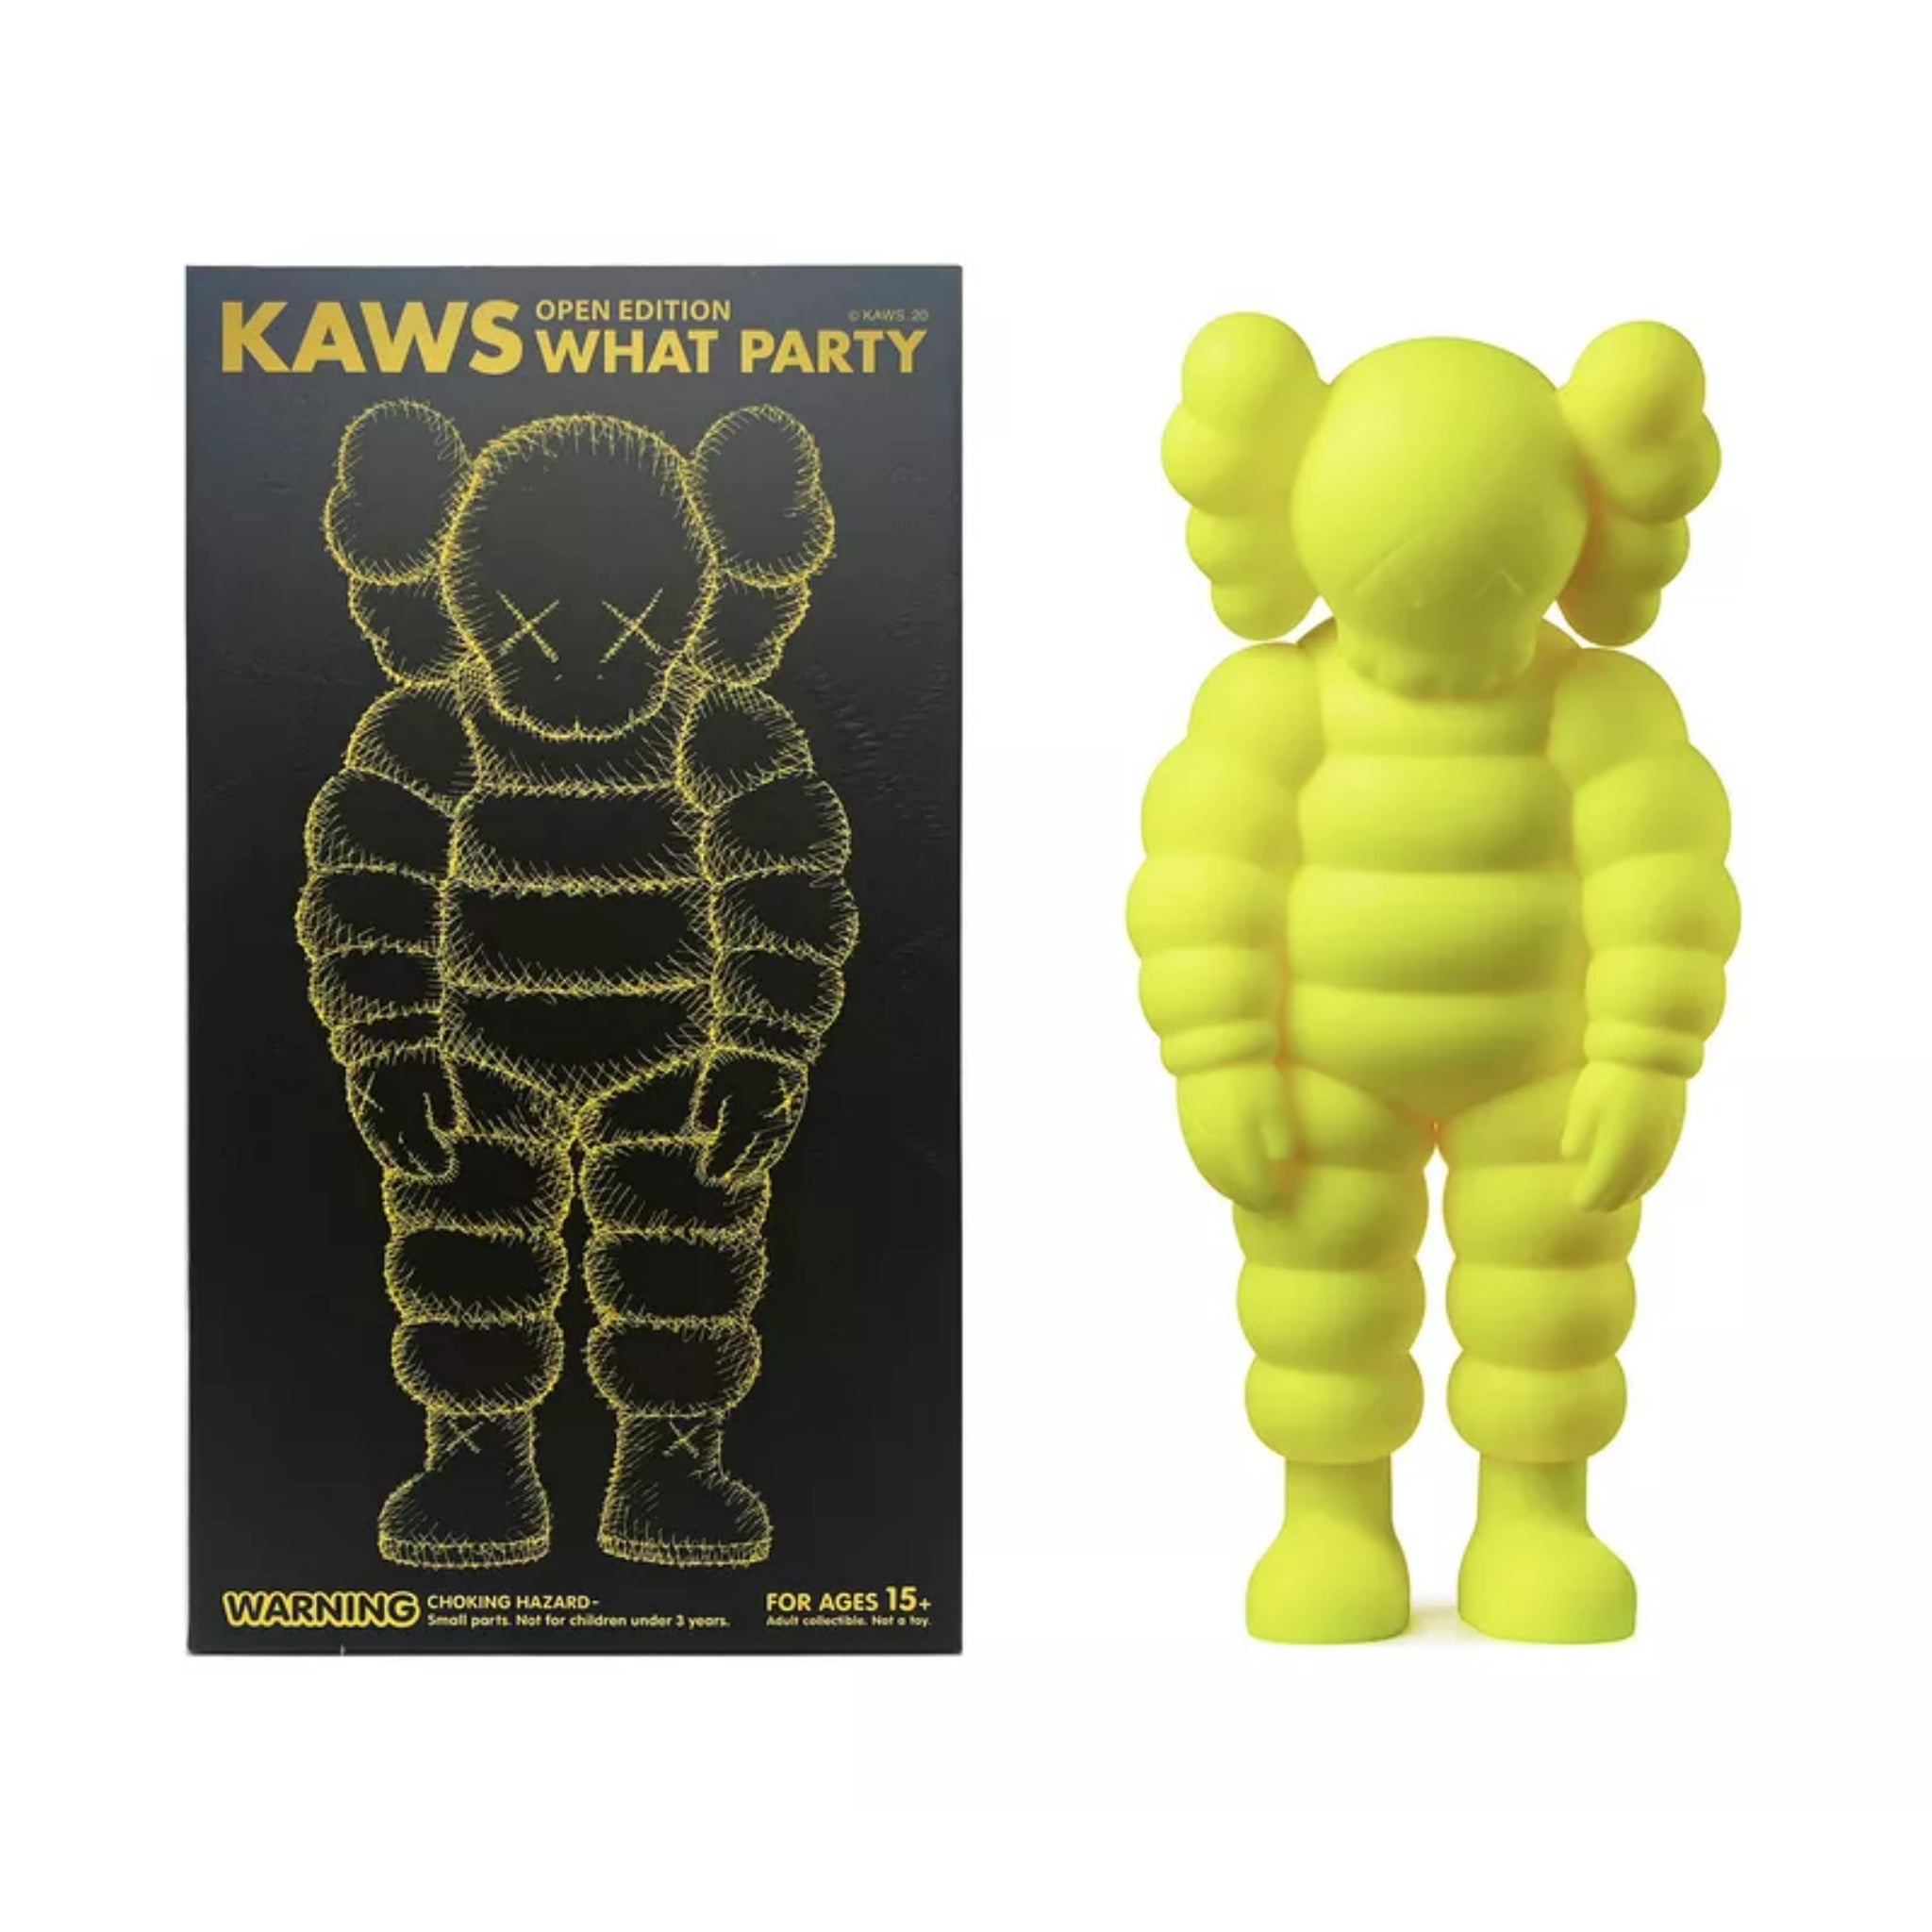 KAWS Open Edition WHAT PARTY – LAW DIVINE